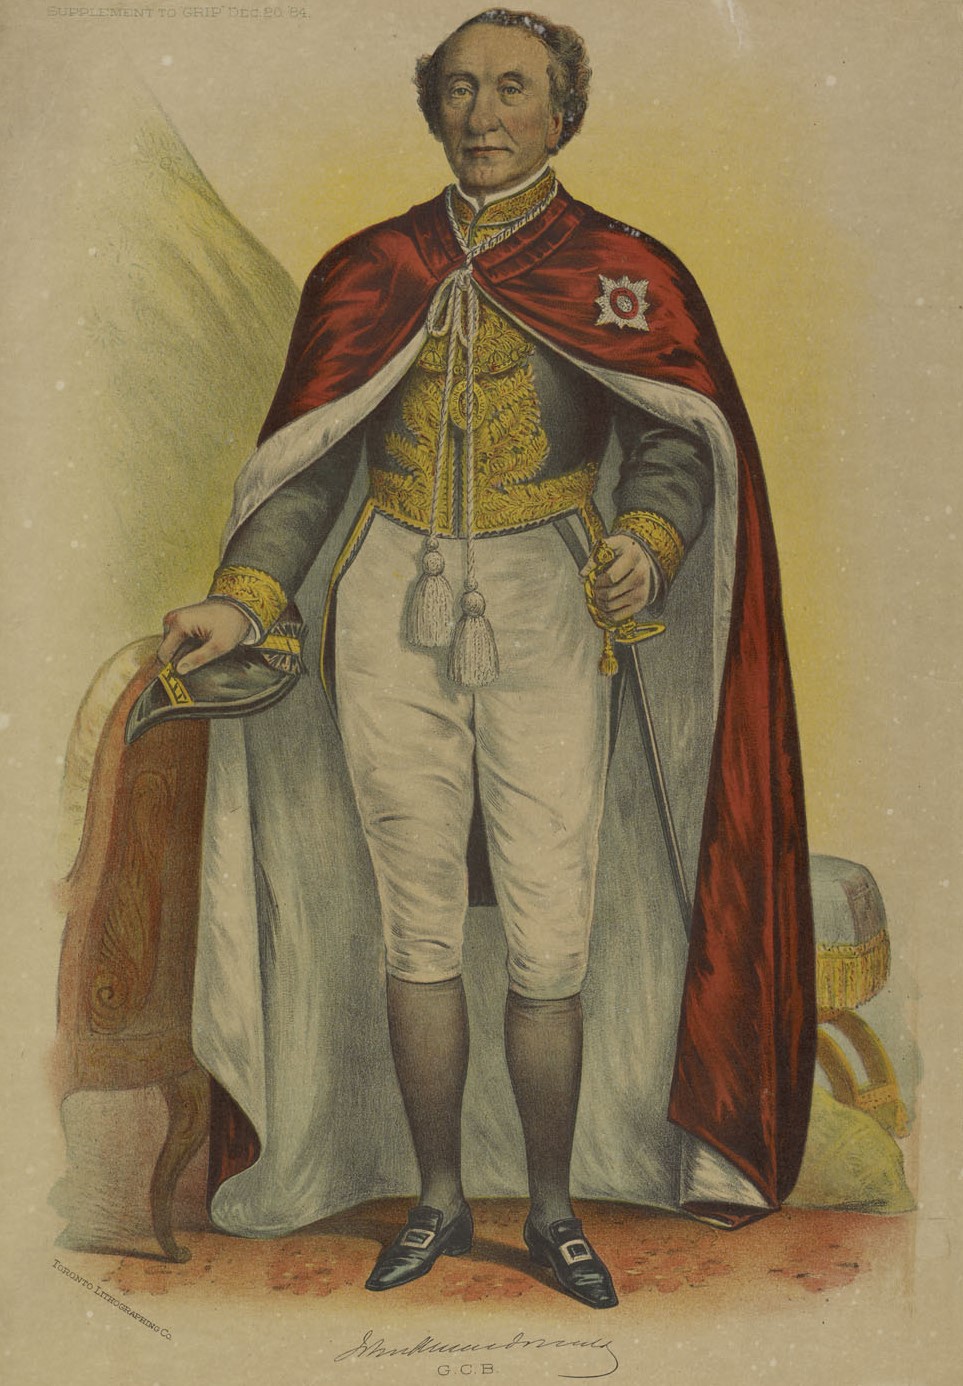 Lithography of an olderman wearing a Royal-style red cape, hand on sword.